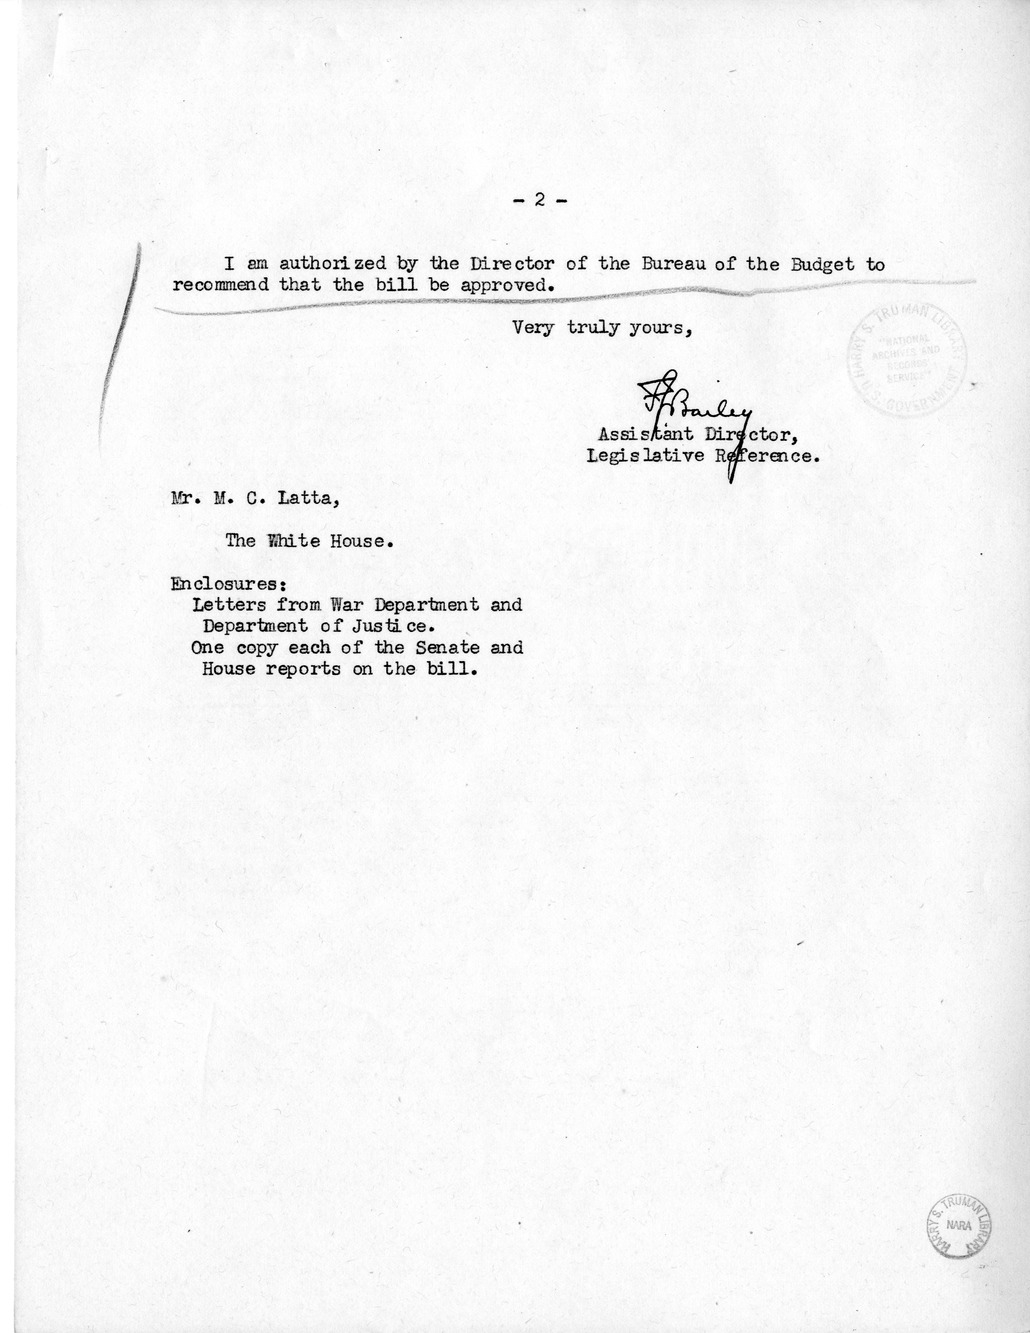 Memorandum from Frederick J. Bailey to M. C. Latta, H.R. 3081, For the Relief of August Svelund, with Attachments